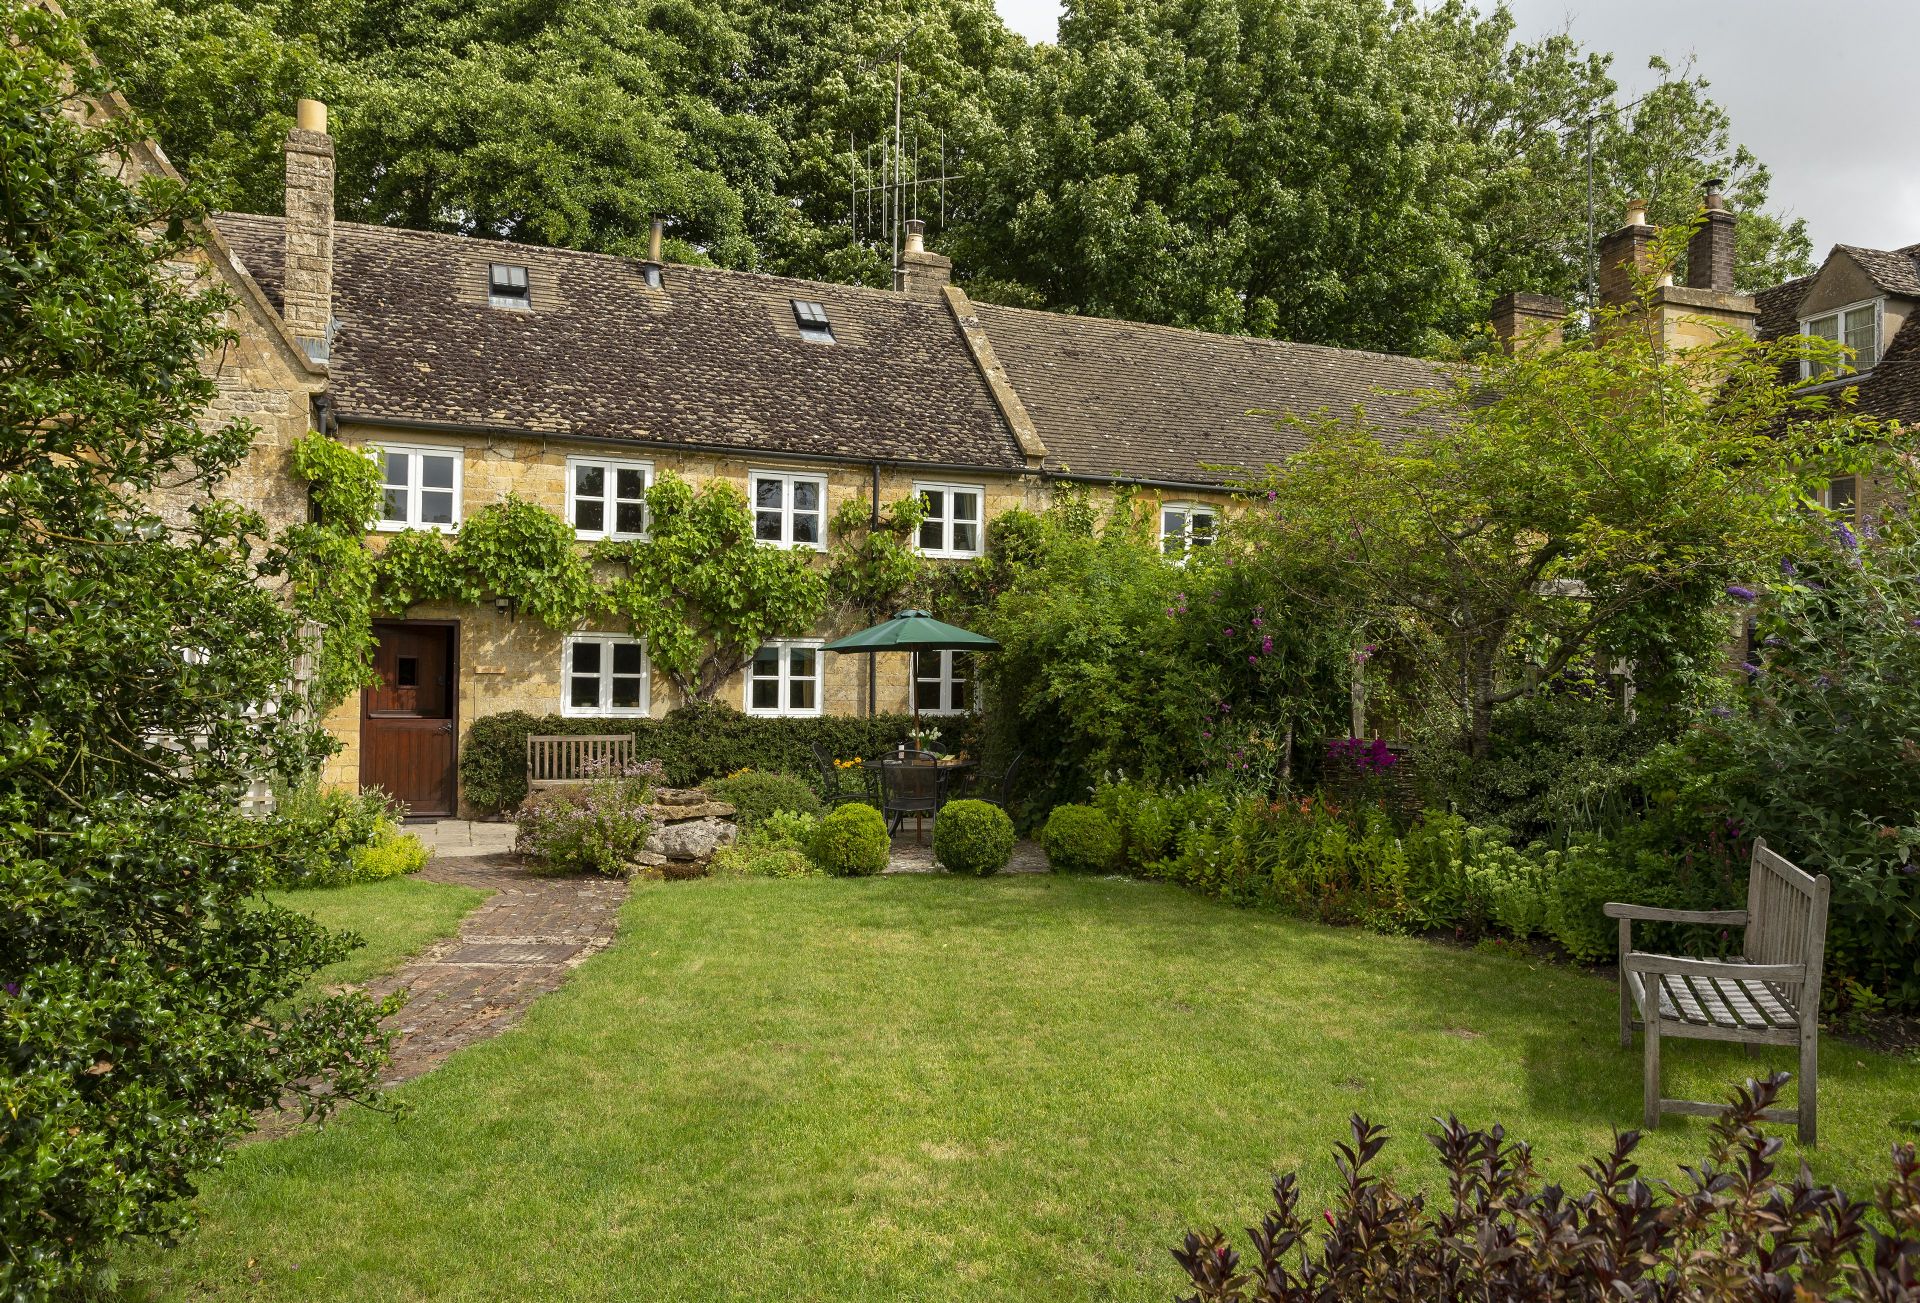 Details about a cottage Holiday at Dyers Cottage